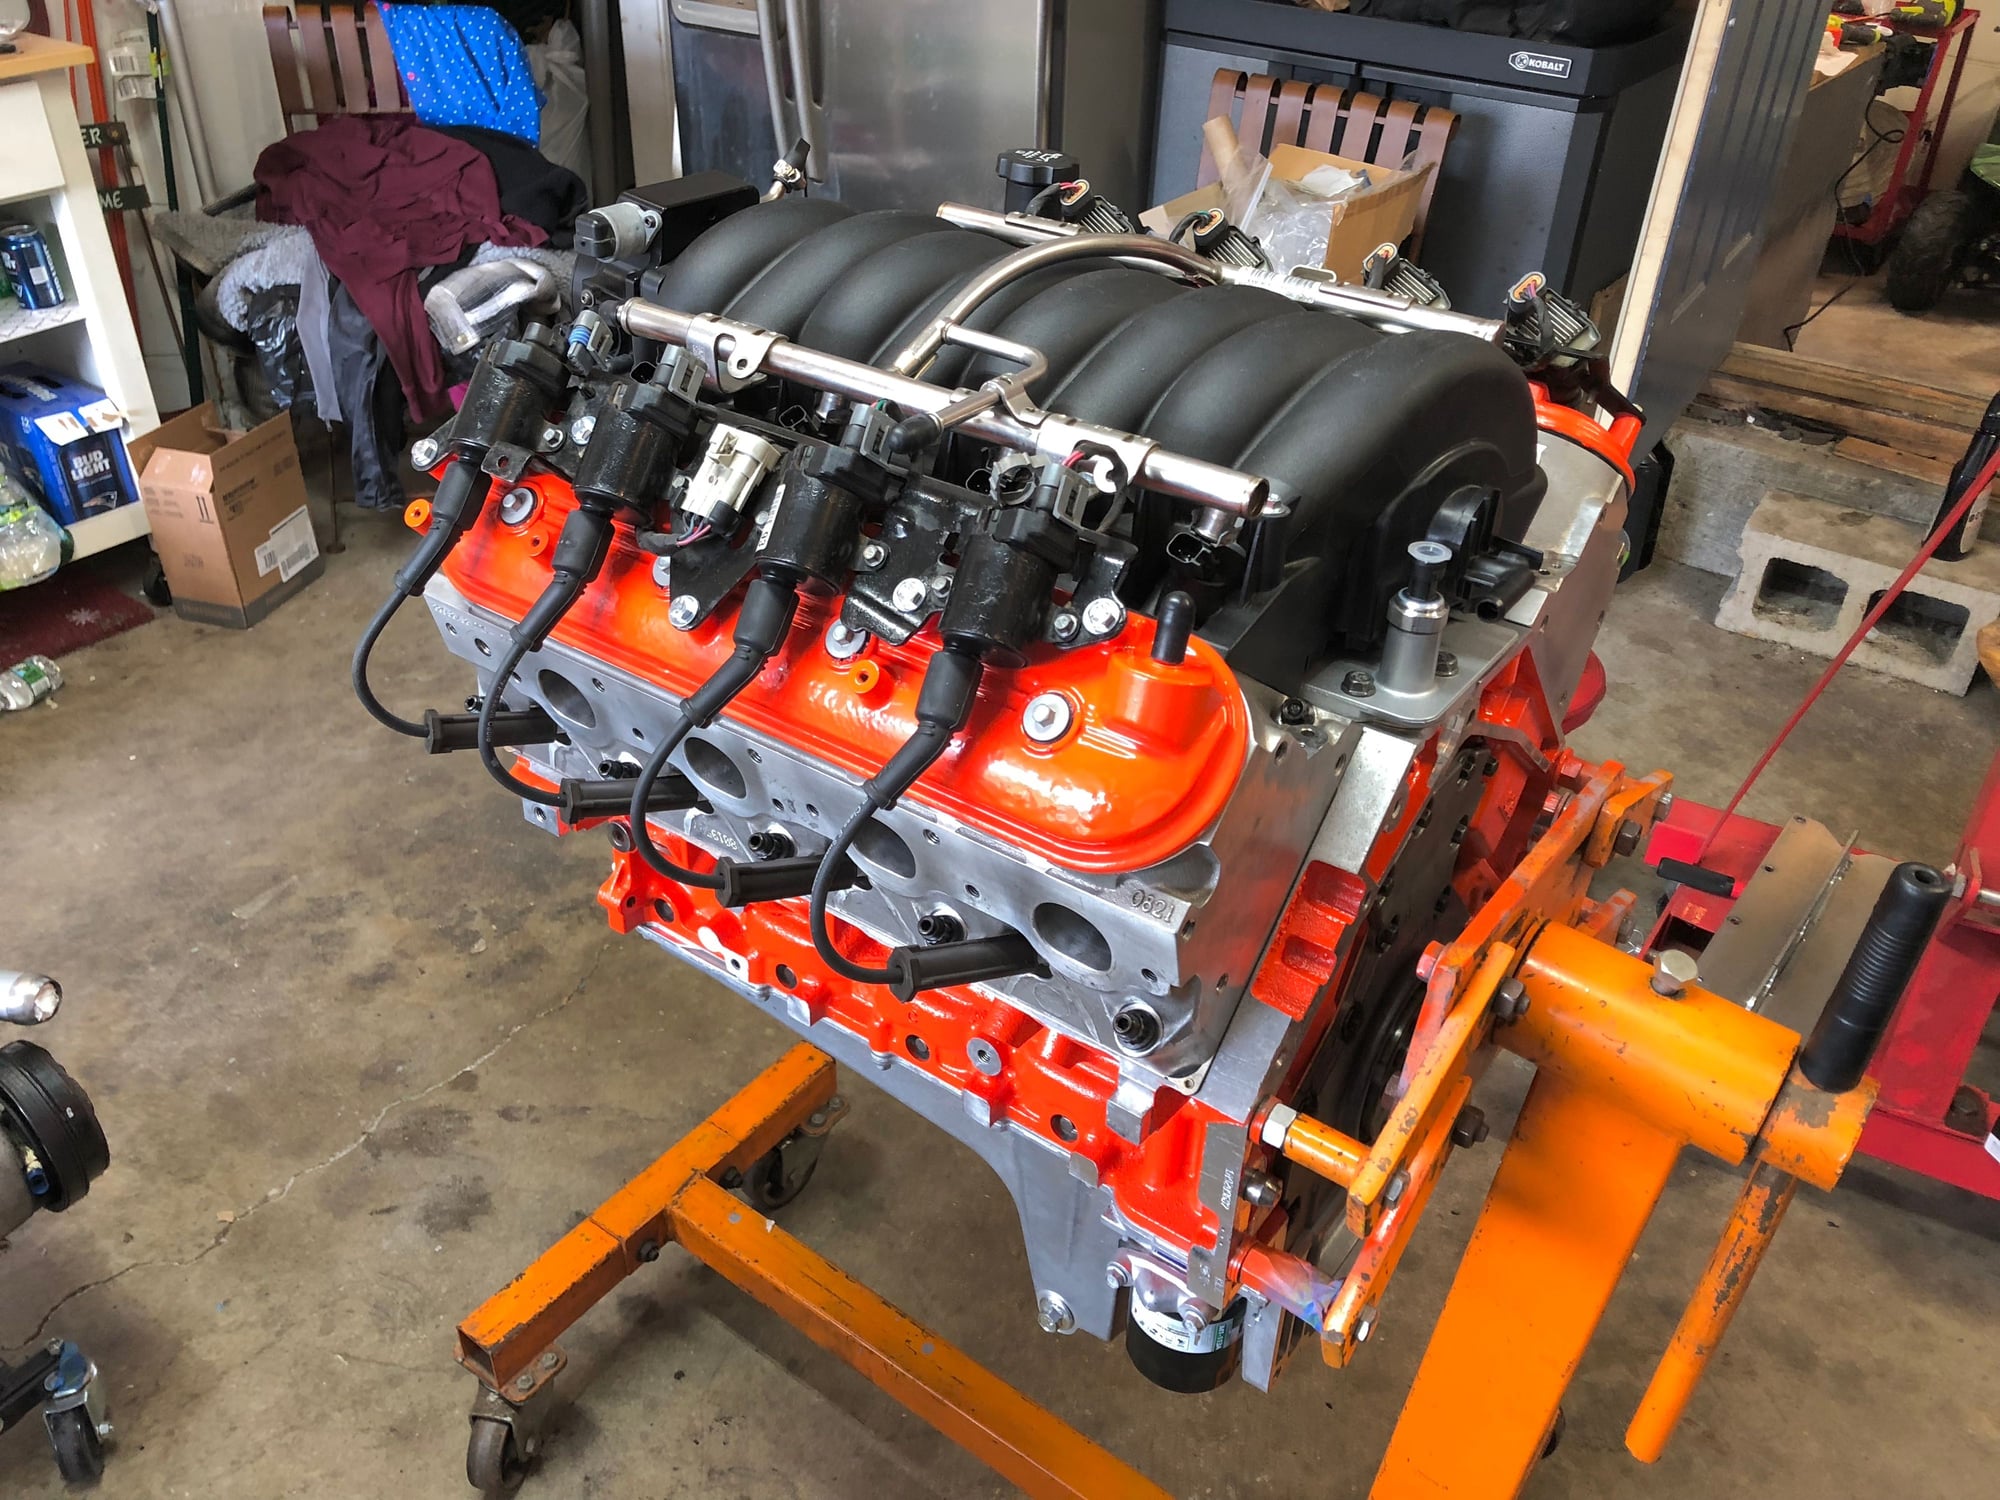  - Fresh Complete LS3 Motor - Ready to go with lots of goodies - Bridgewater, MA 02324, United States